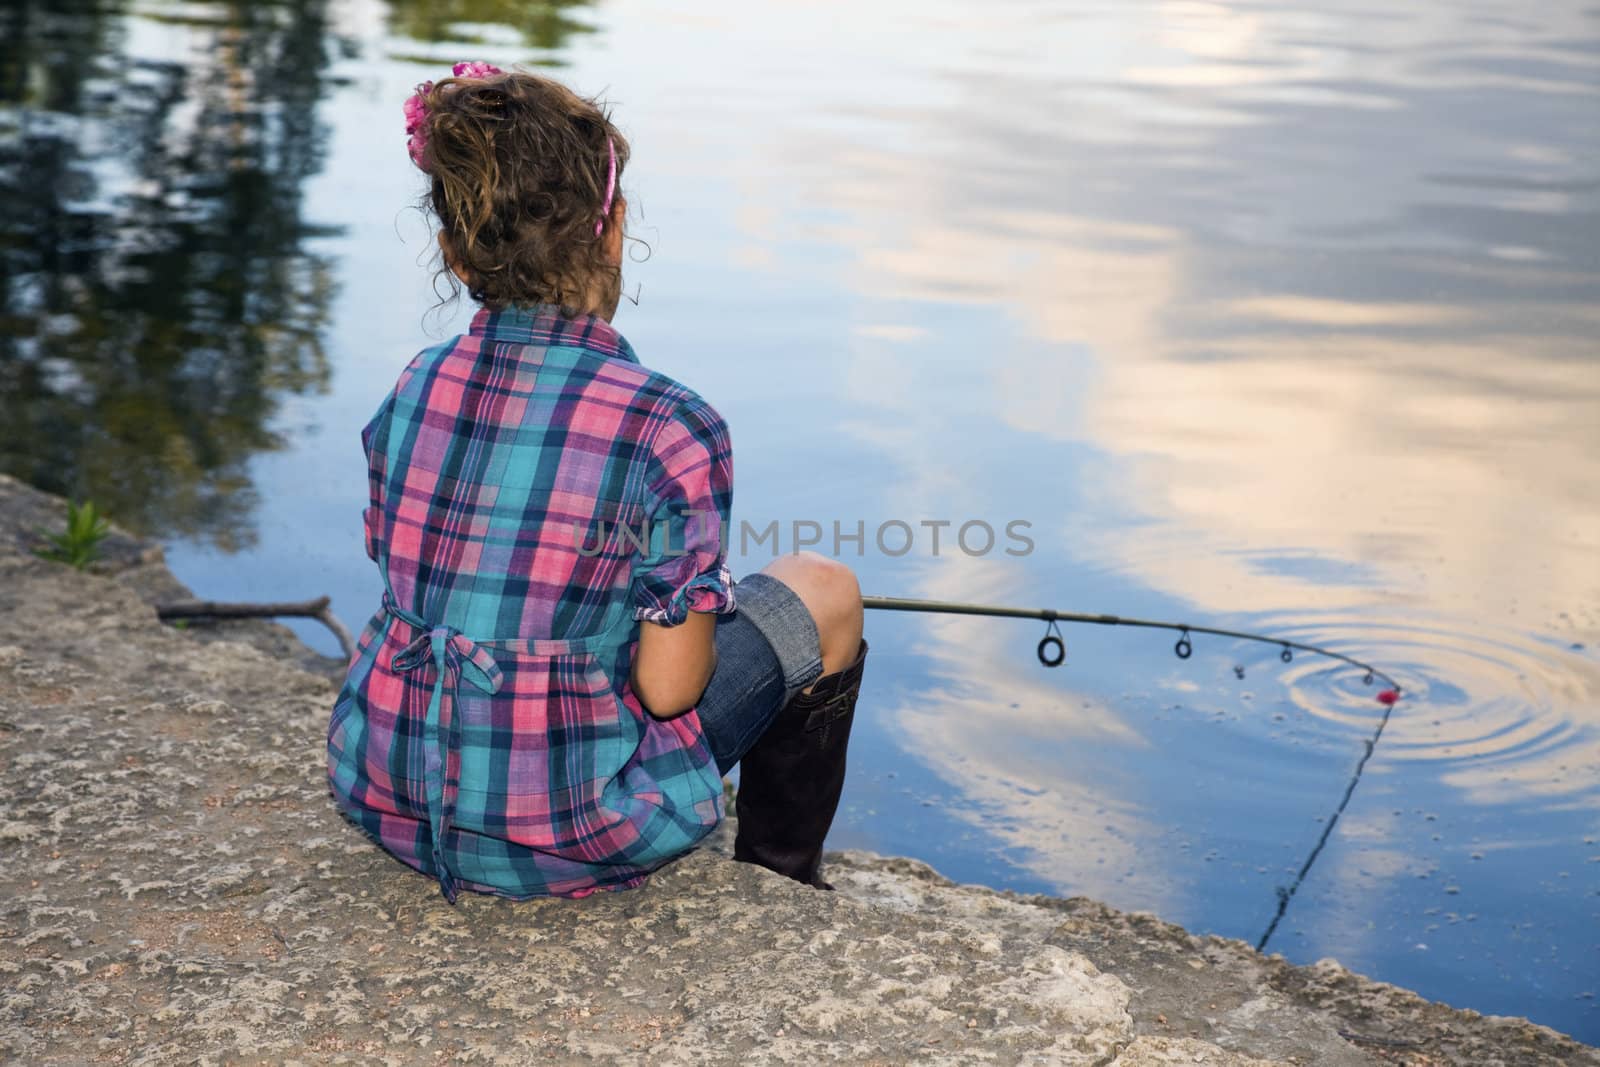 Fishing time - little girl by the lake.